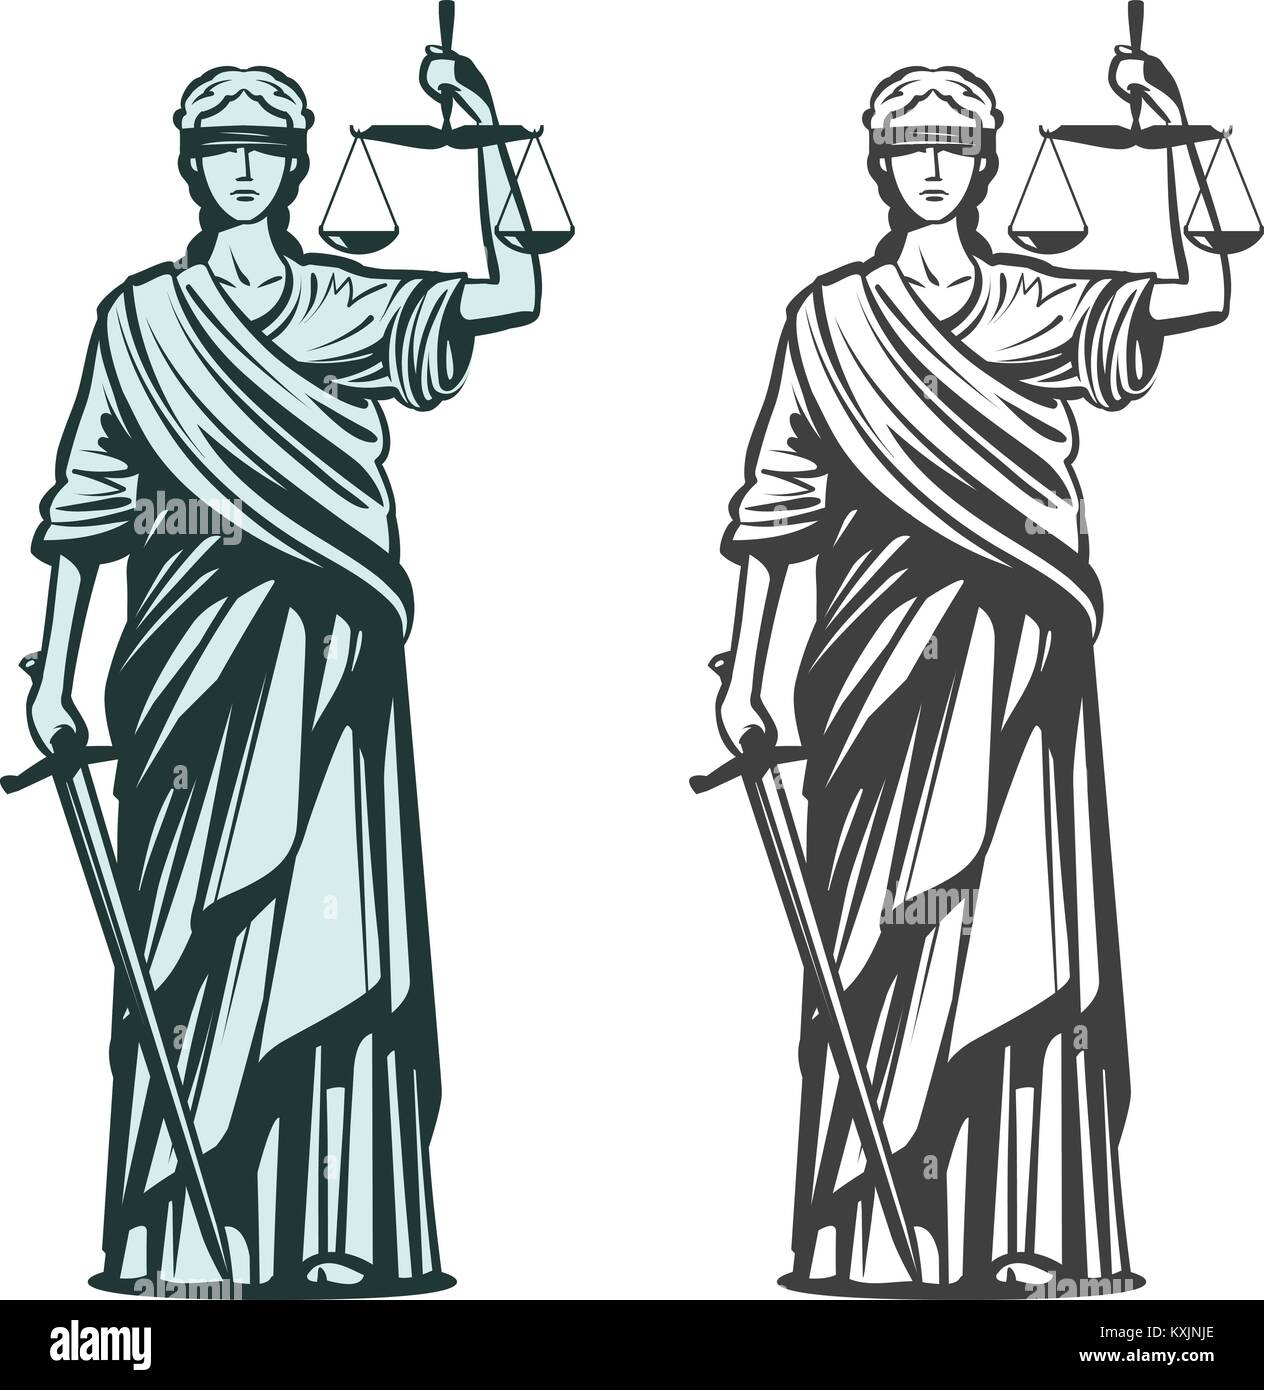 Judiciary symbol. Lady justice with blindfold, scales and sword in